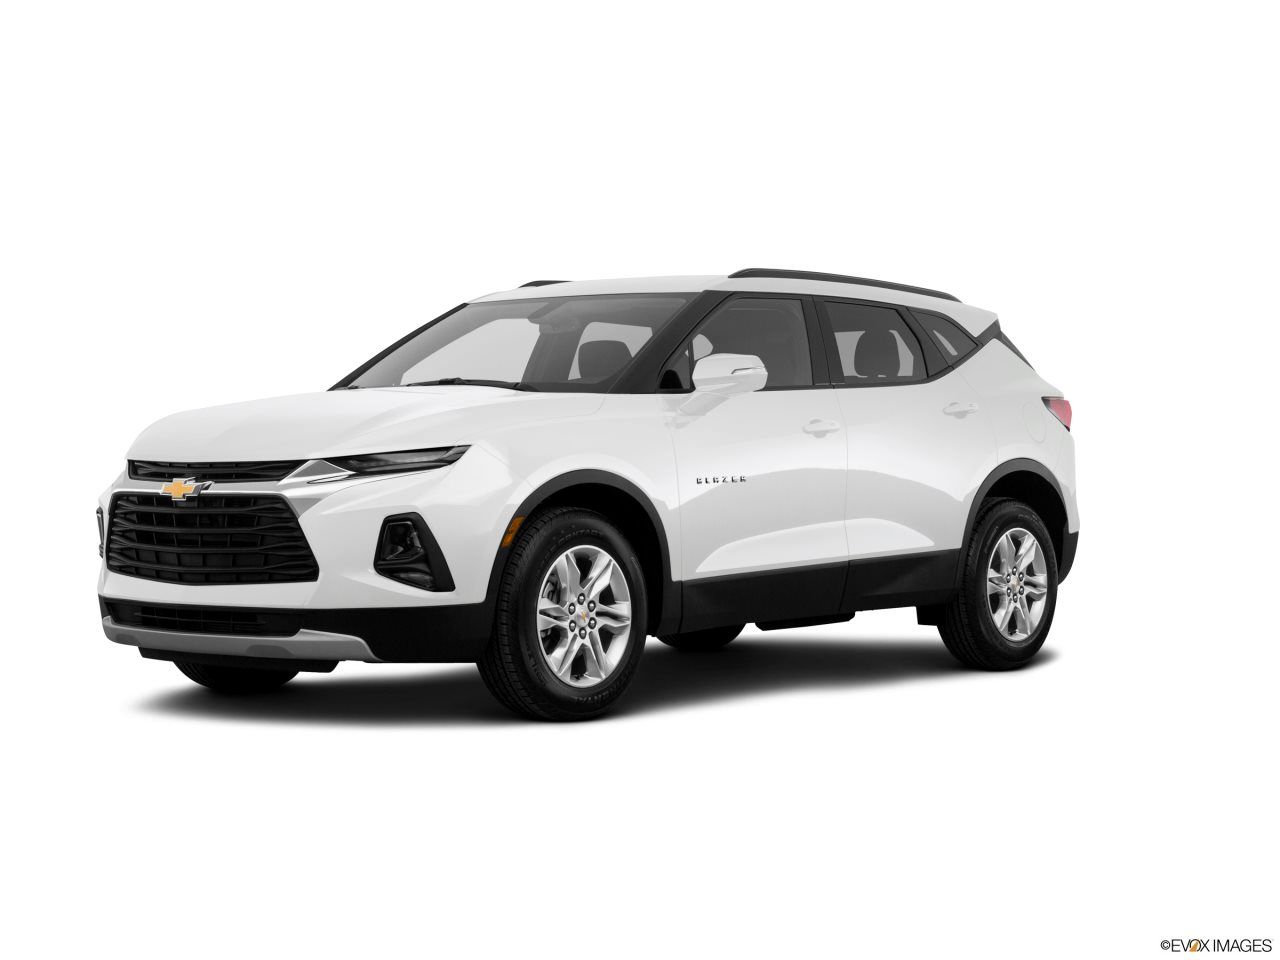 2021 Chevrolet Blazer Research, Photos, Specs, and Expertise | CarMax